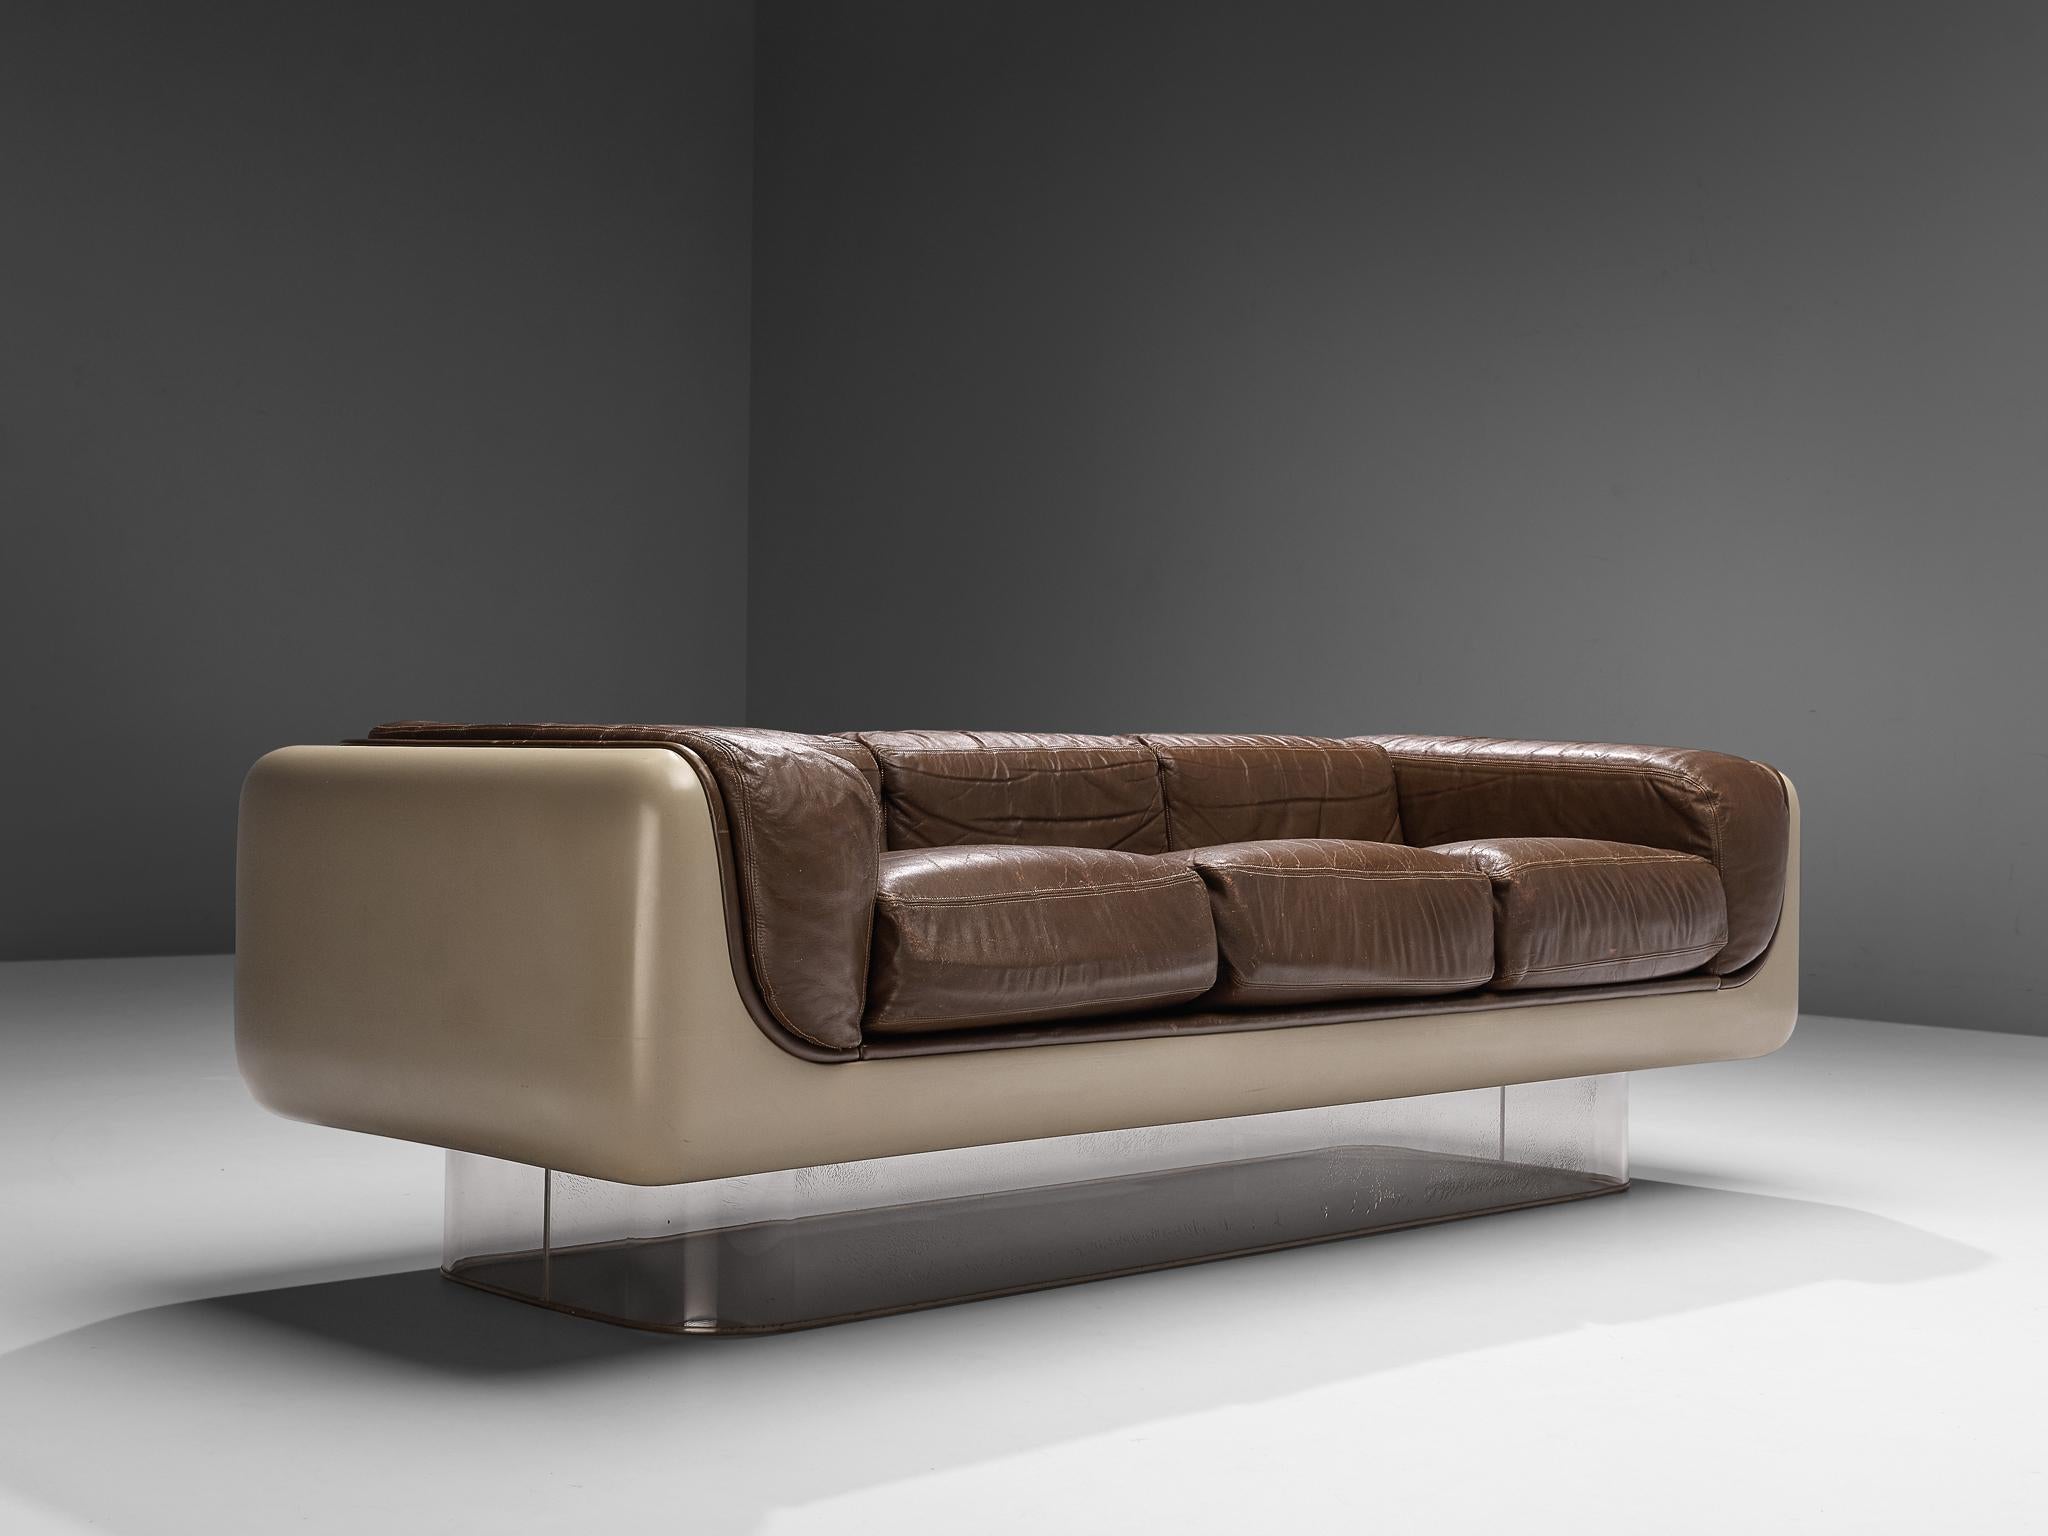 William C. Andrus for Steelcase, three-seat sofa, fiberglass, lucite, leather, United States, 1970s

The bright brown fiberglass shell rests on a transparent lucite base. Brown leather cushions are placed in the shell and provide great comfort. This